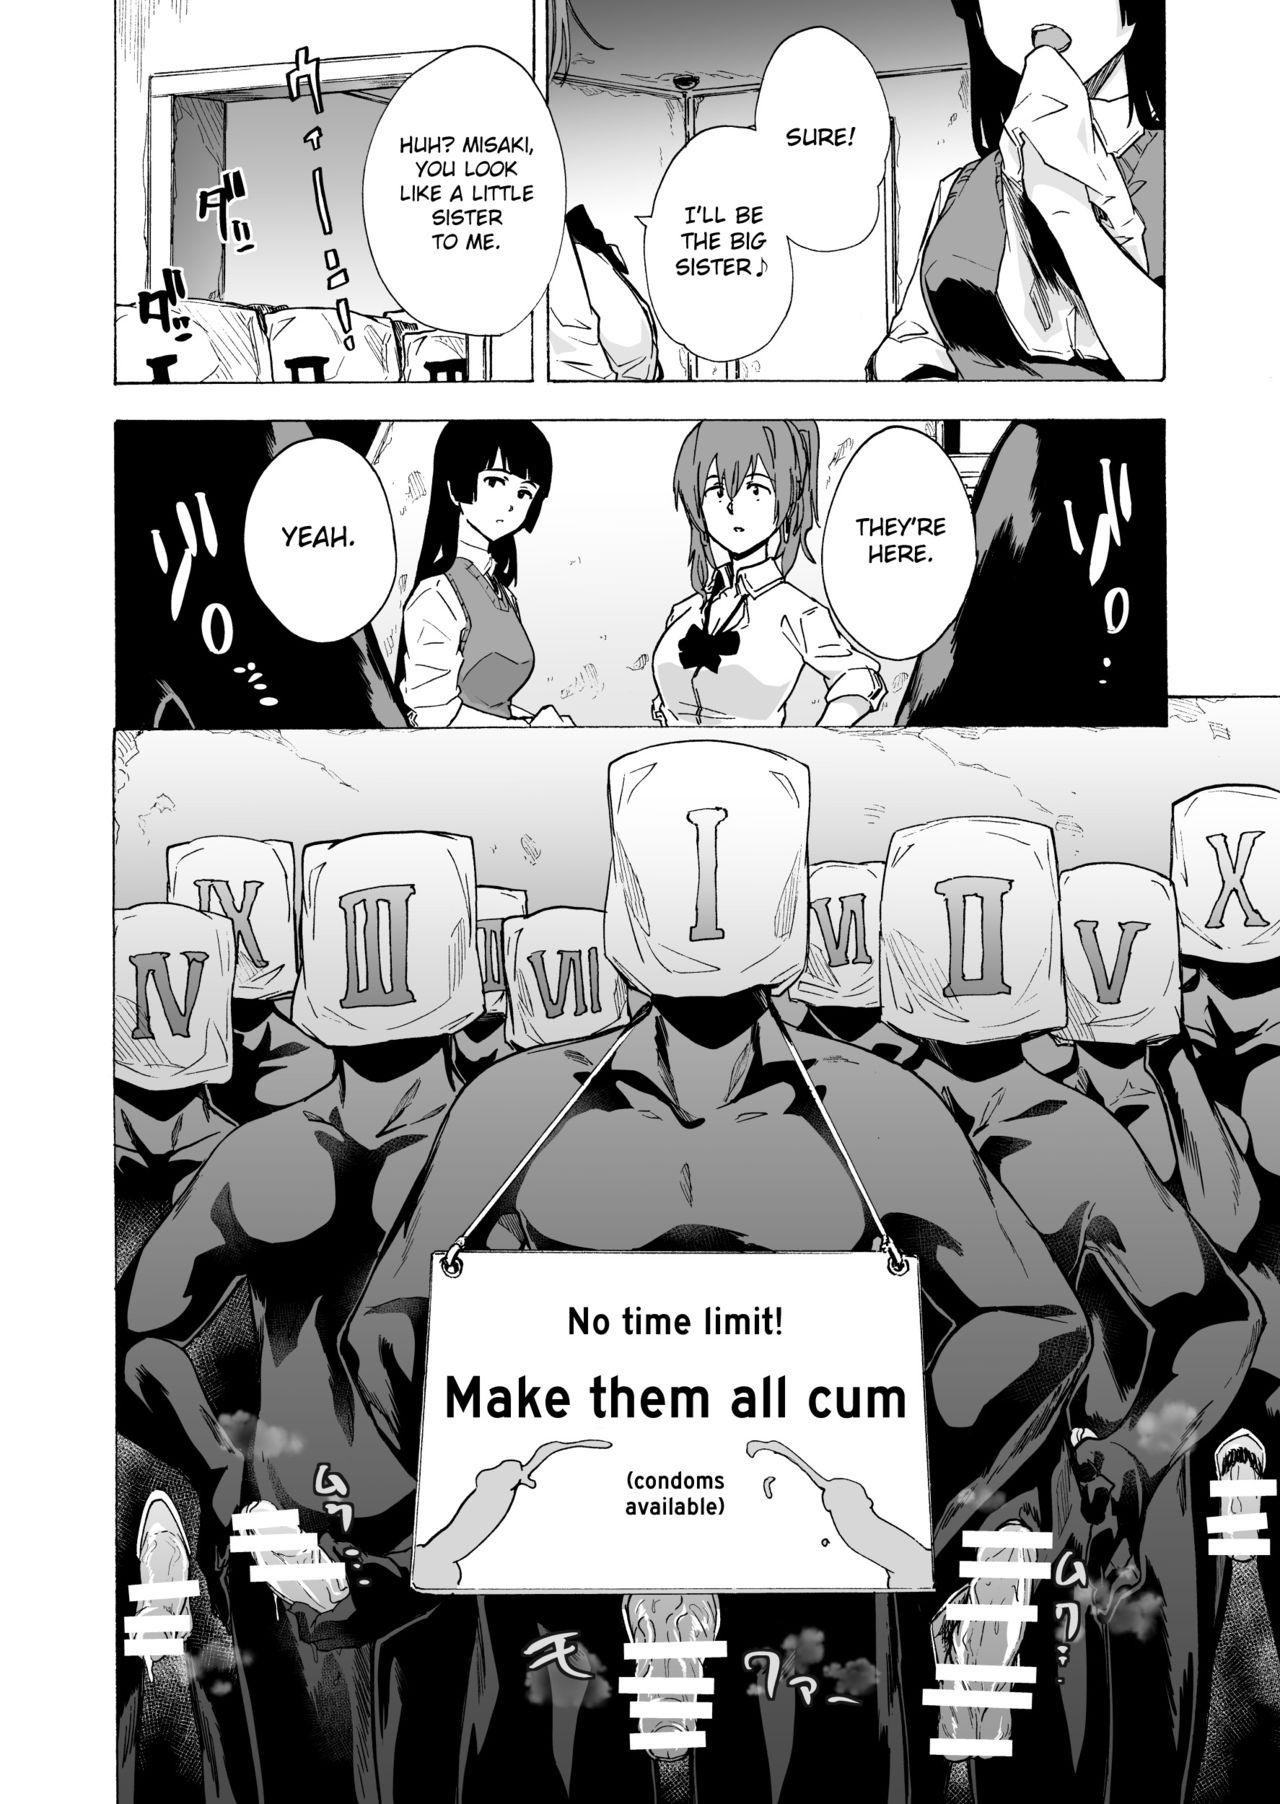 Stockings GAME OF BITCHES 2 - Original Cute - Page 12